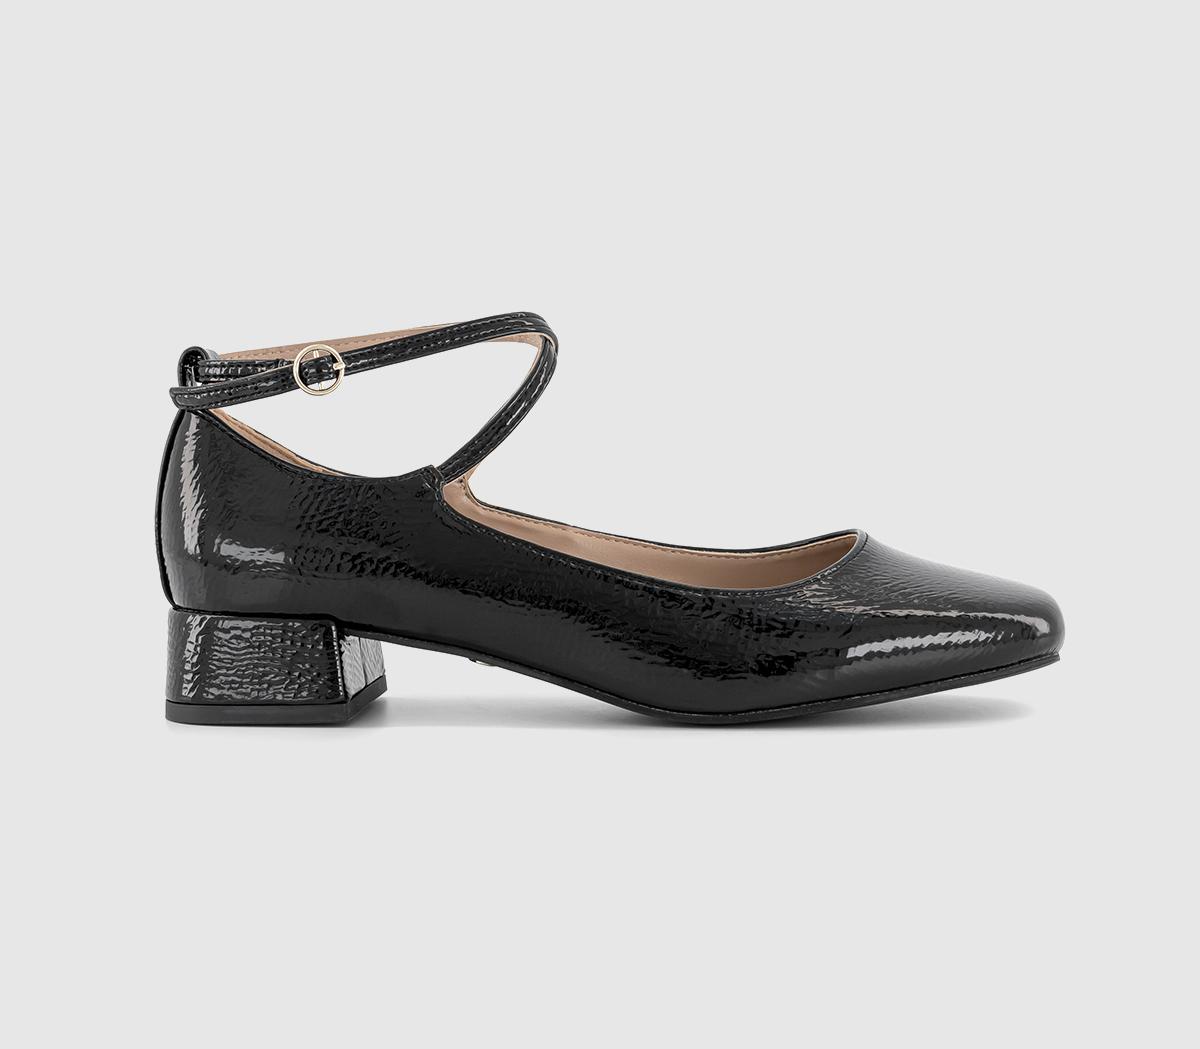 OFFICEFrancesca Cross Over Ankle Strap Mary Jane ShoesBlack Patent